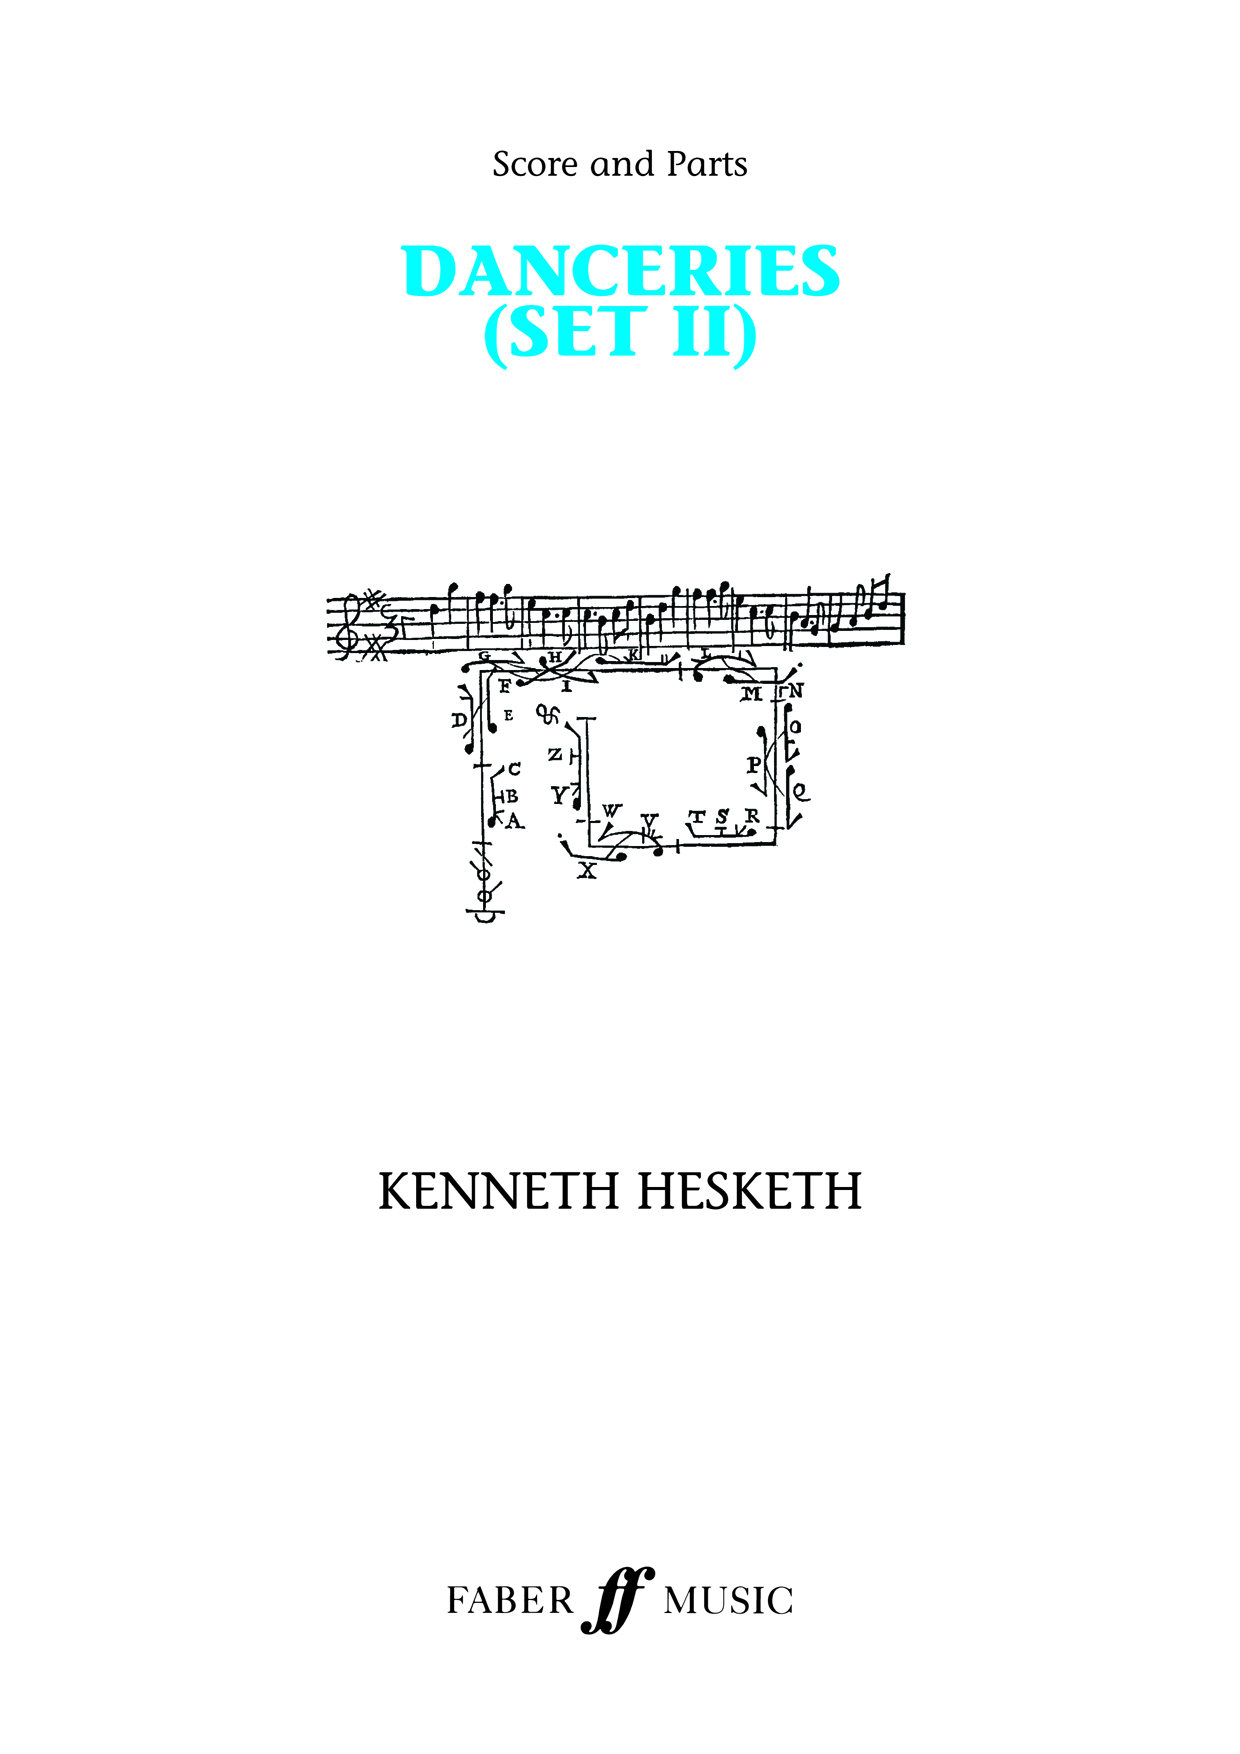 Kenneth Hesketh: Danceries. Set II: Brass Band: Score and Parts